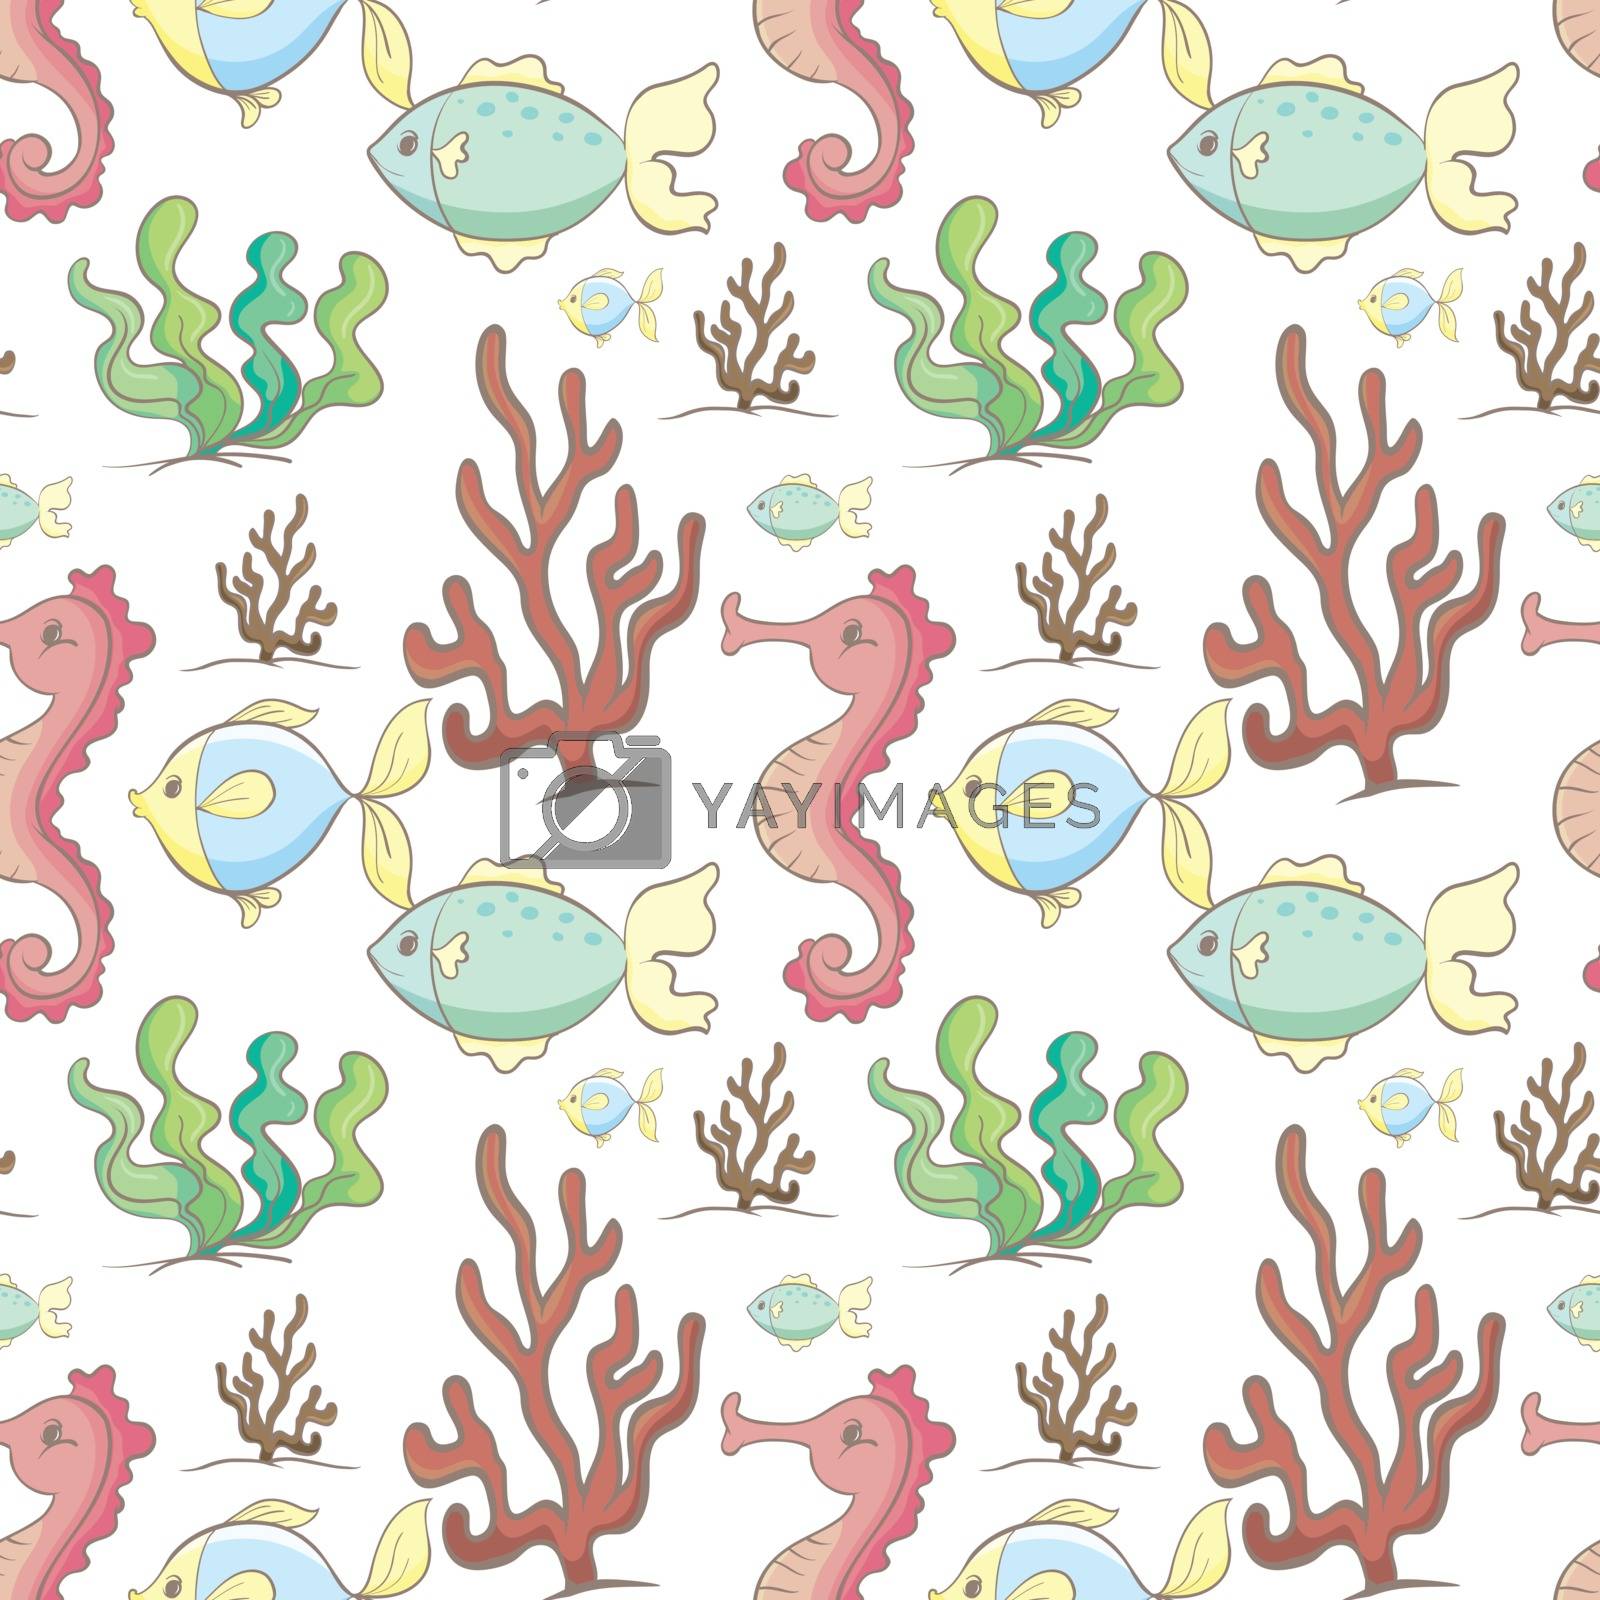 Royalty free image of sea animals and plants by iimages